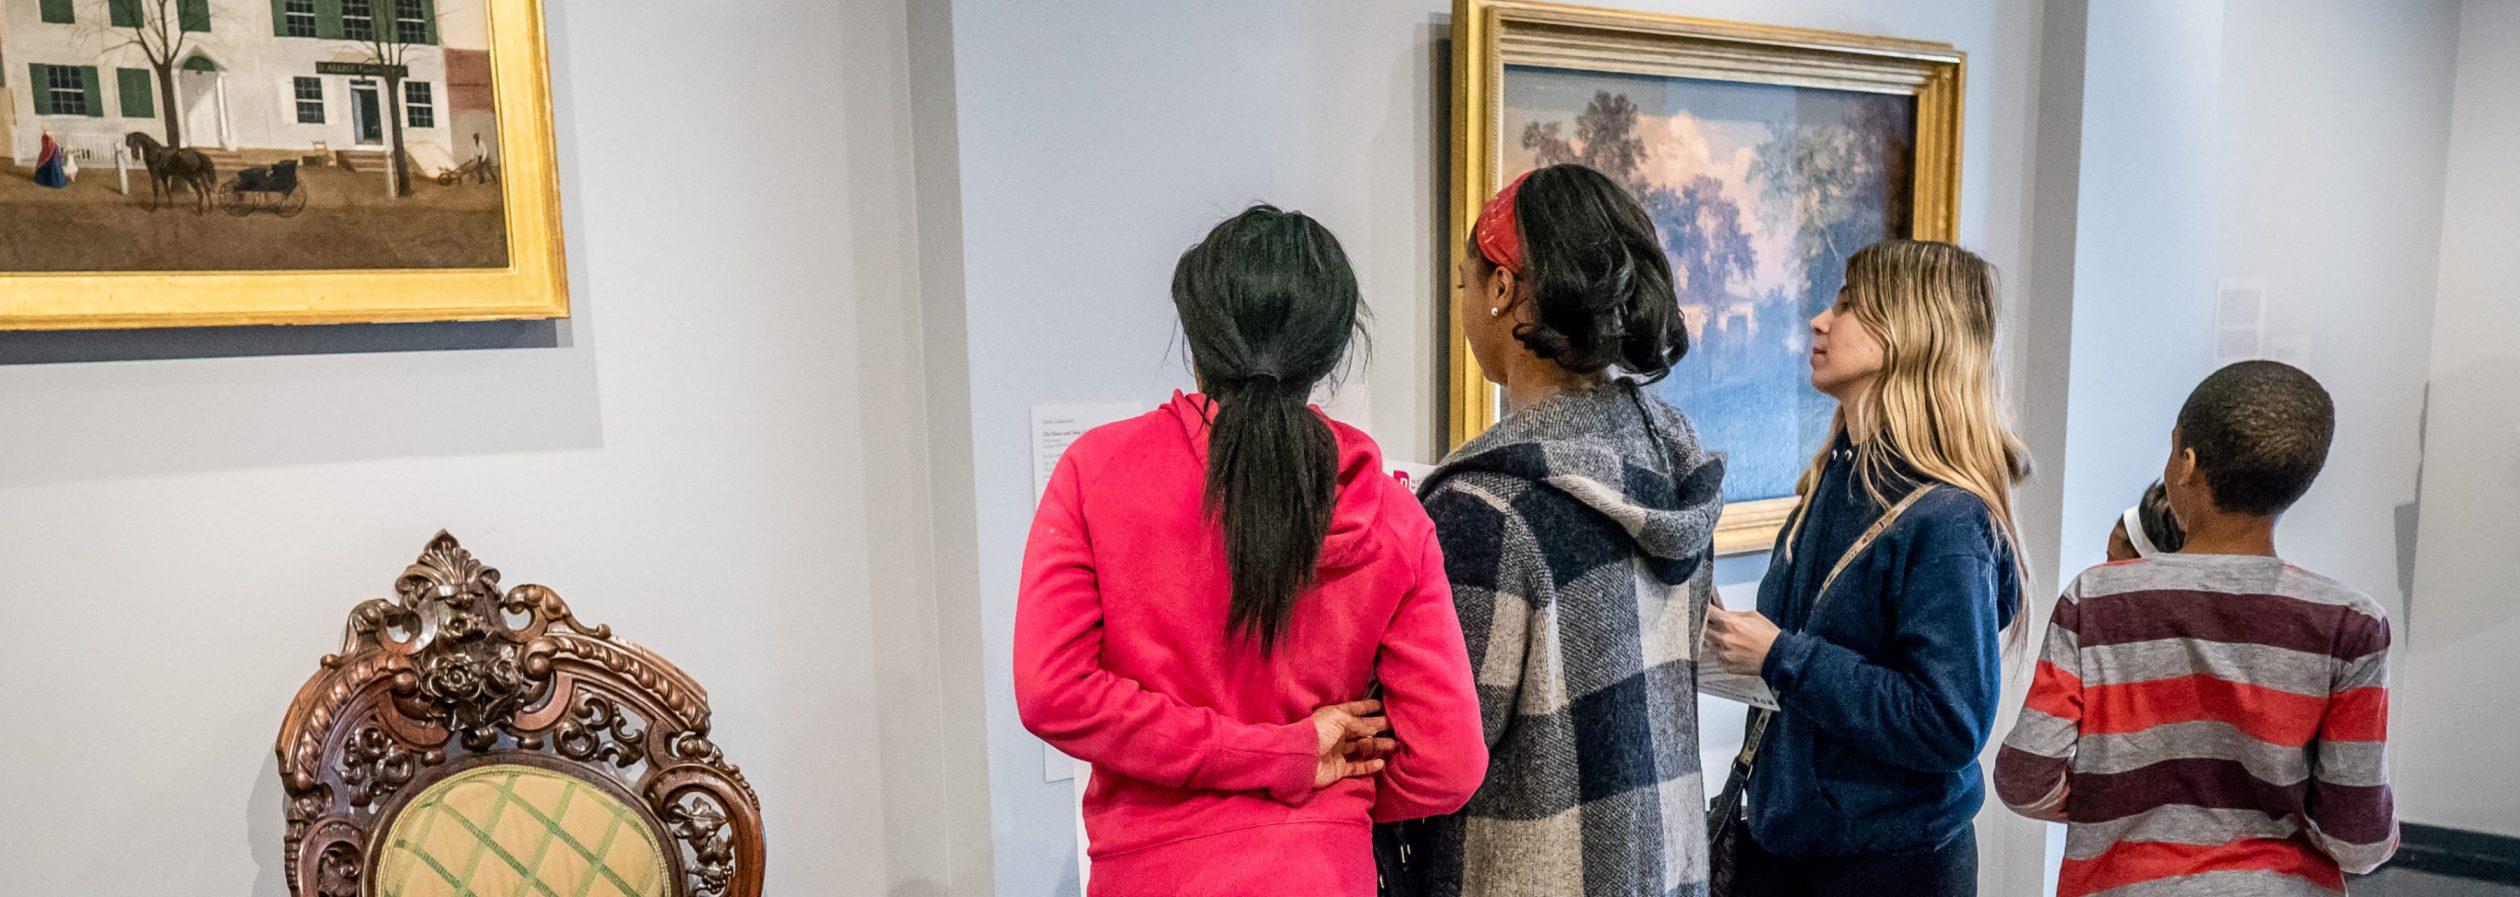 small group of young people looking at art